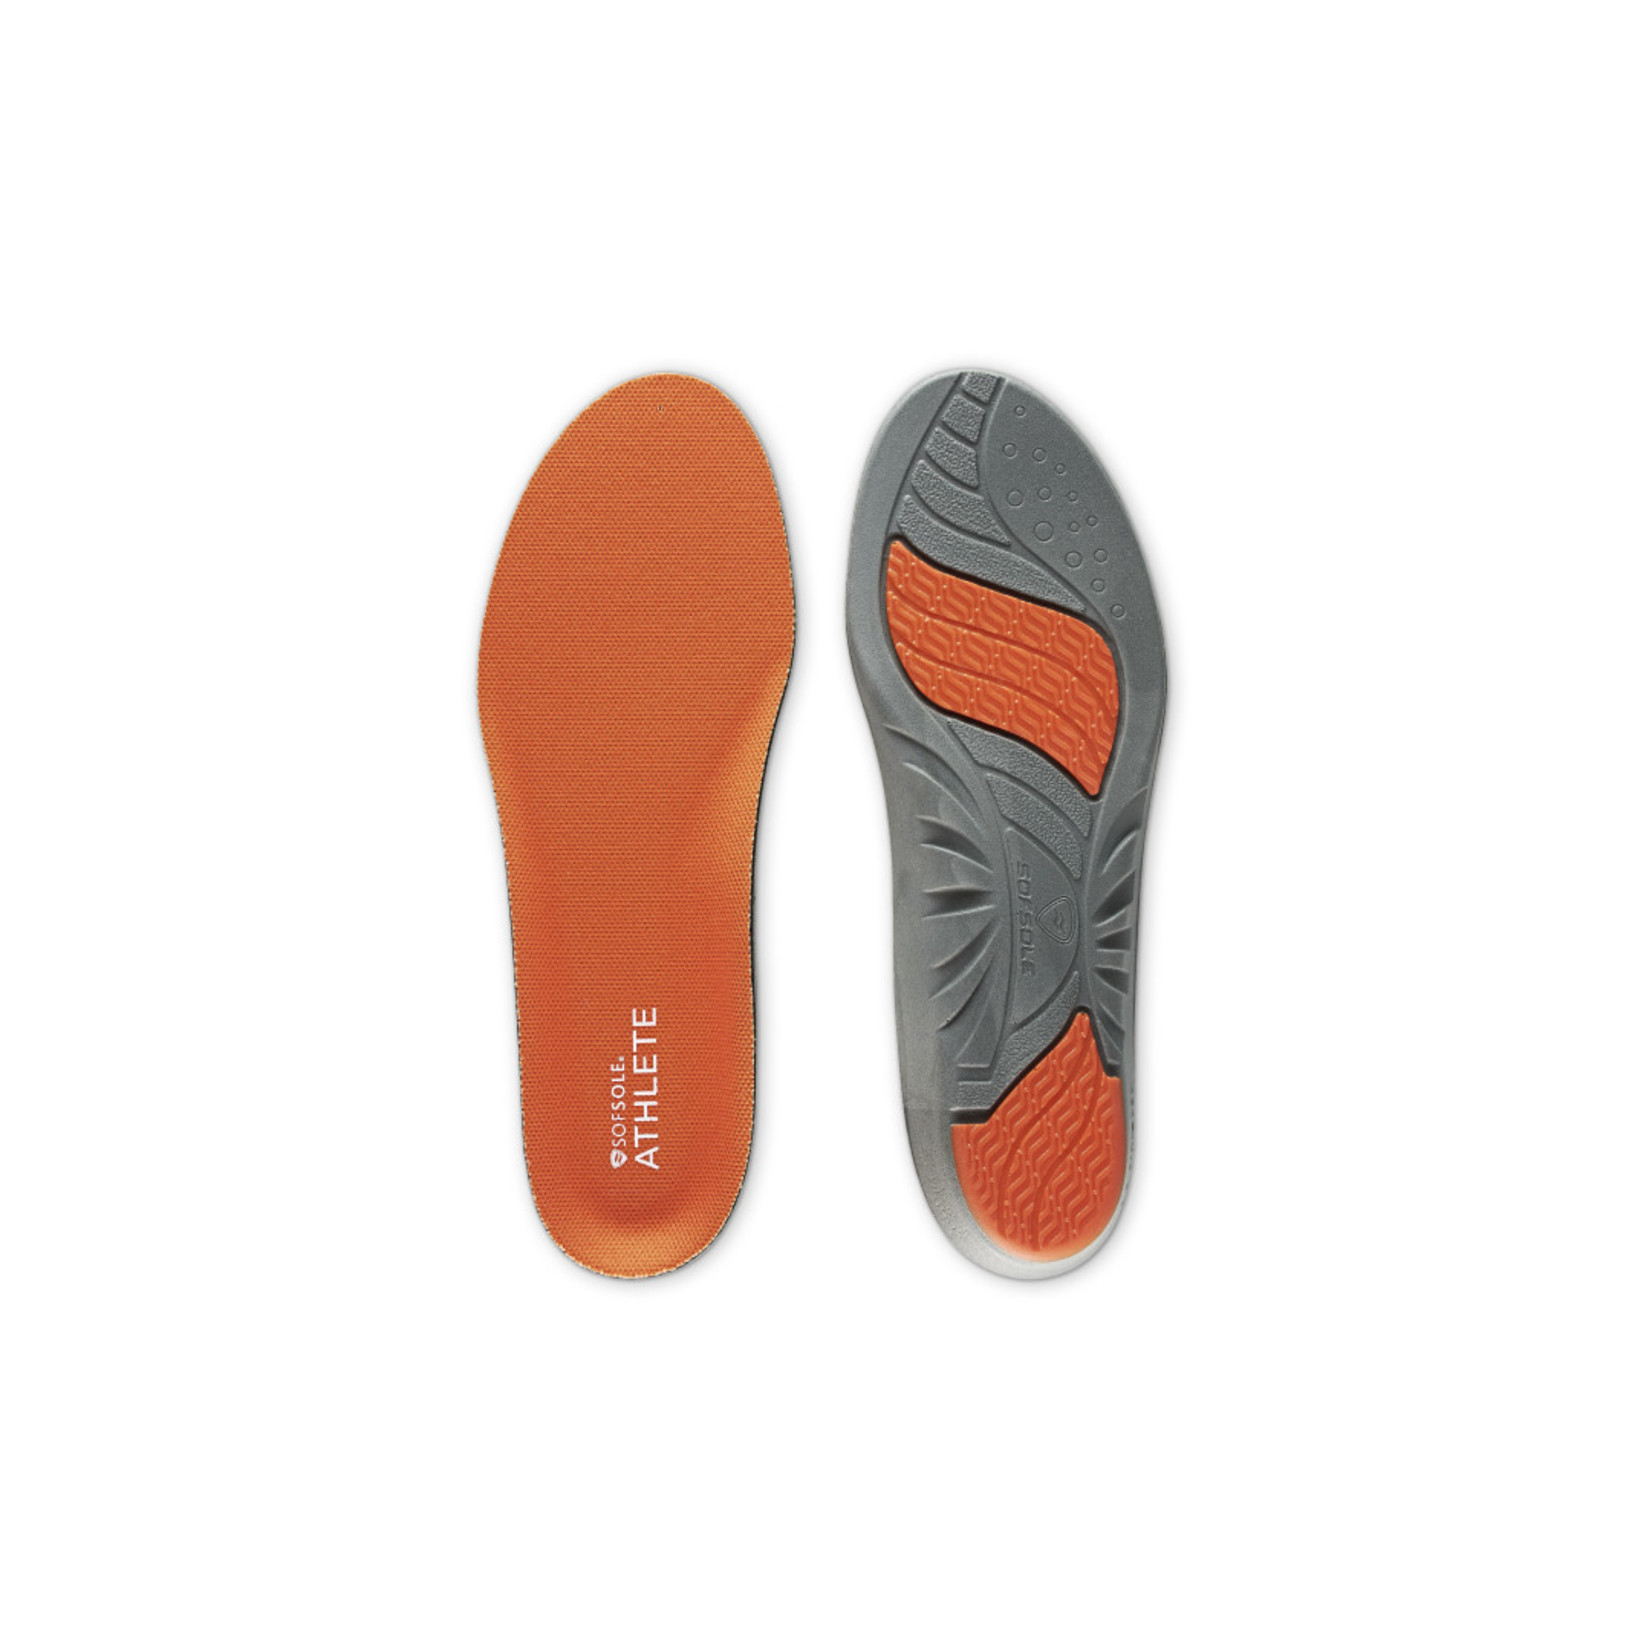 Sofsole Sofsole Women's Athlete Insole